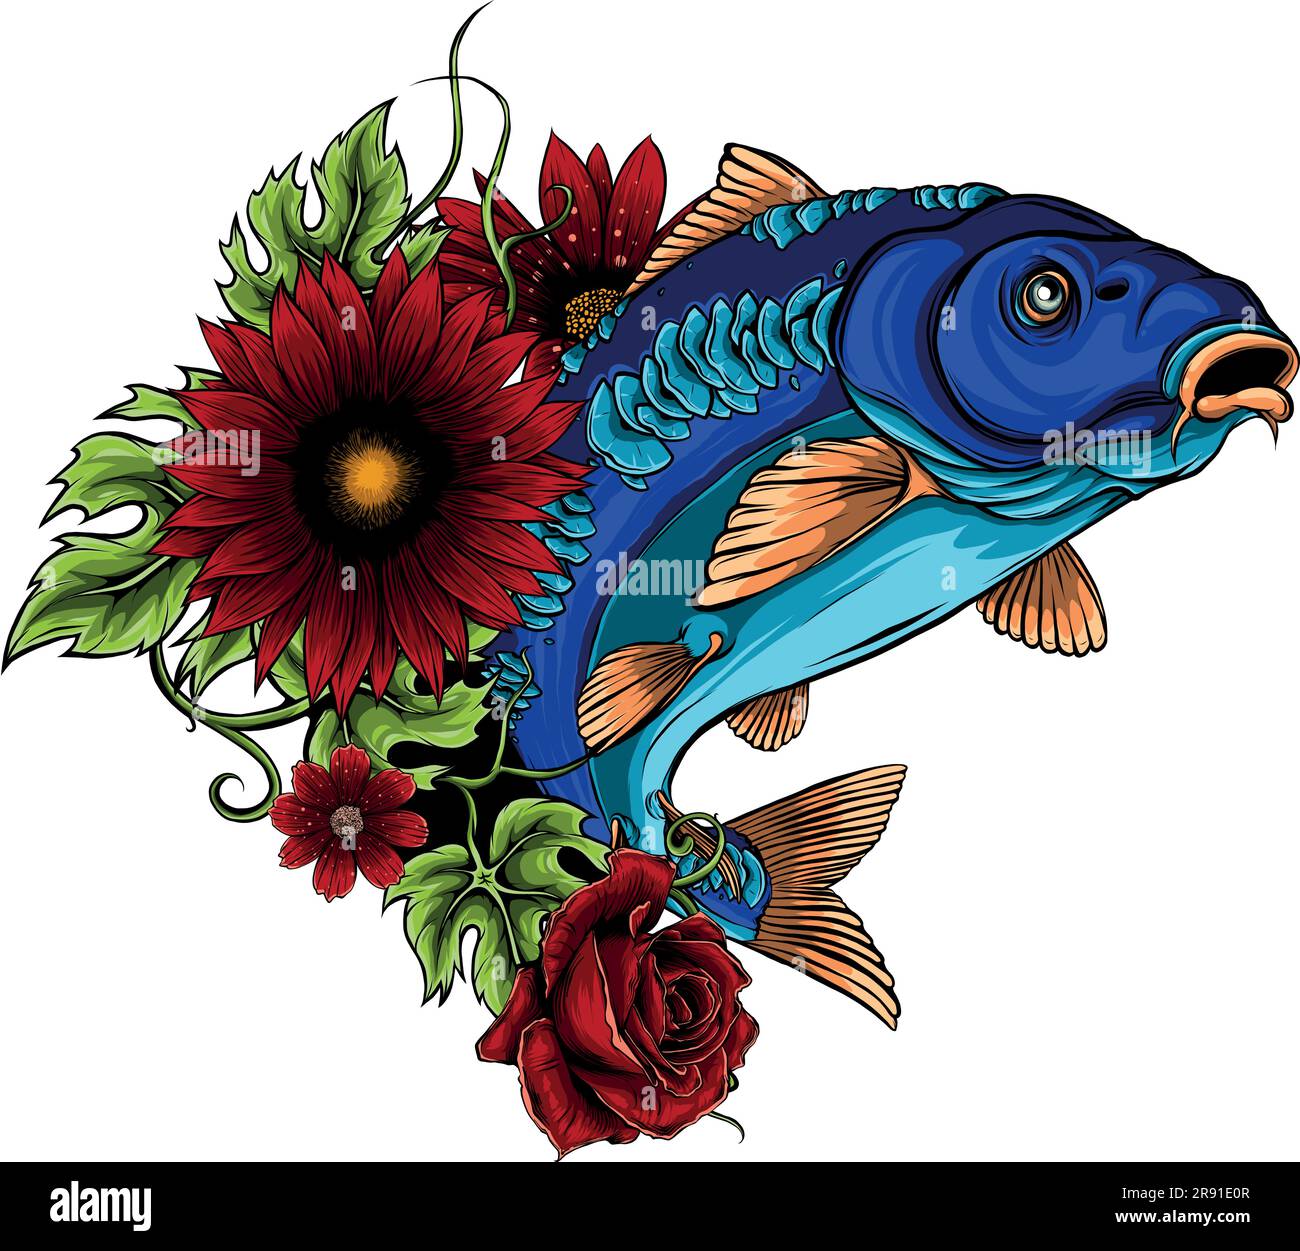 vector illustration of carp and flowers design Stock Vector